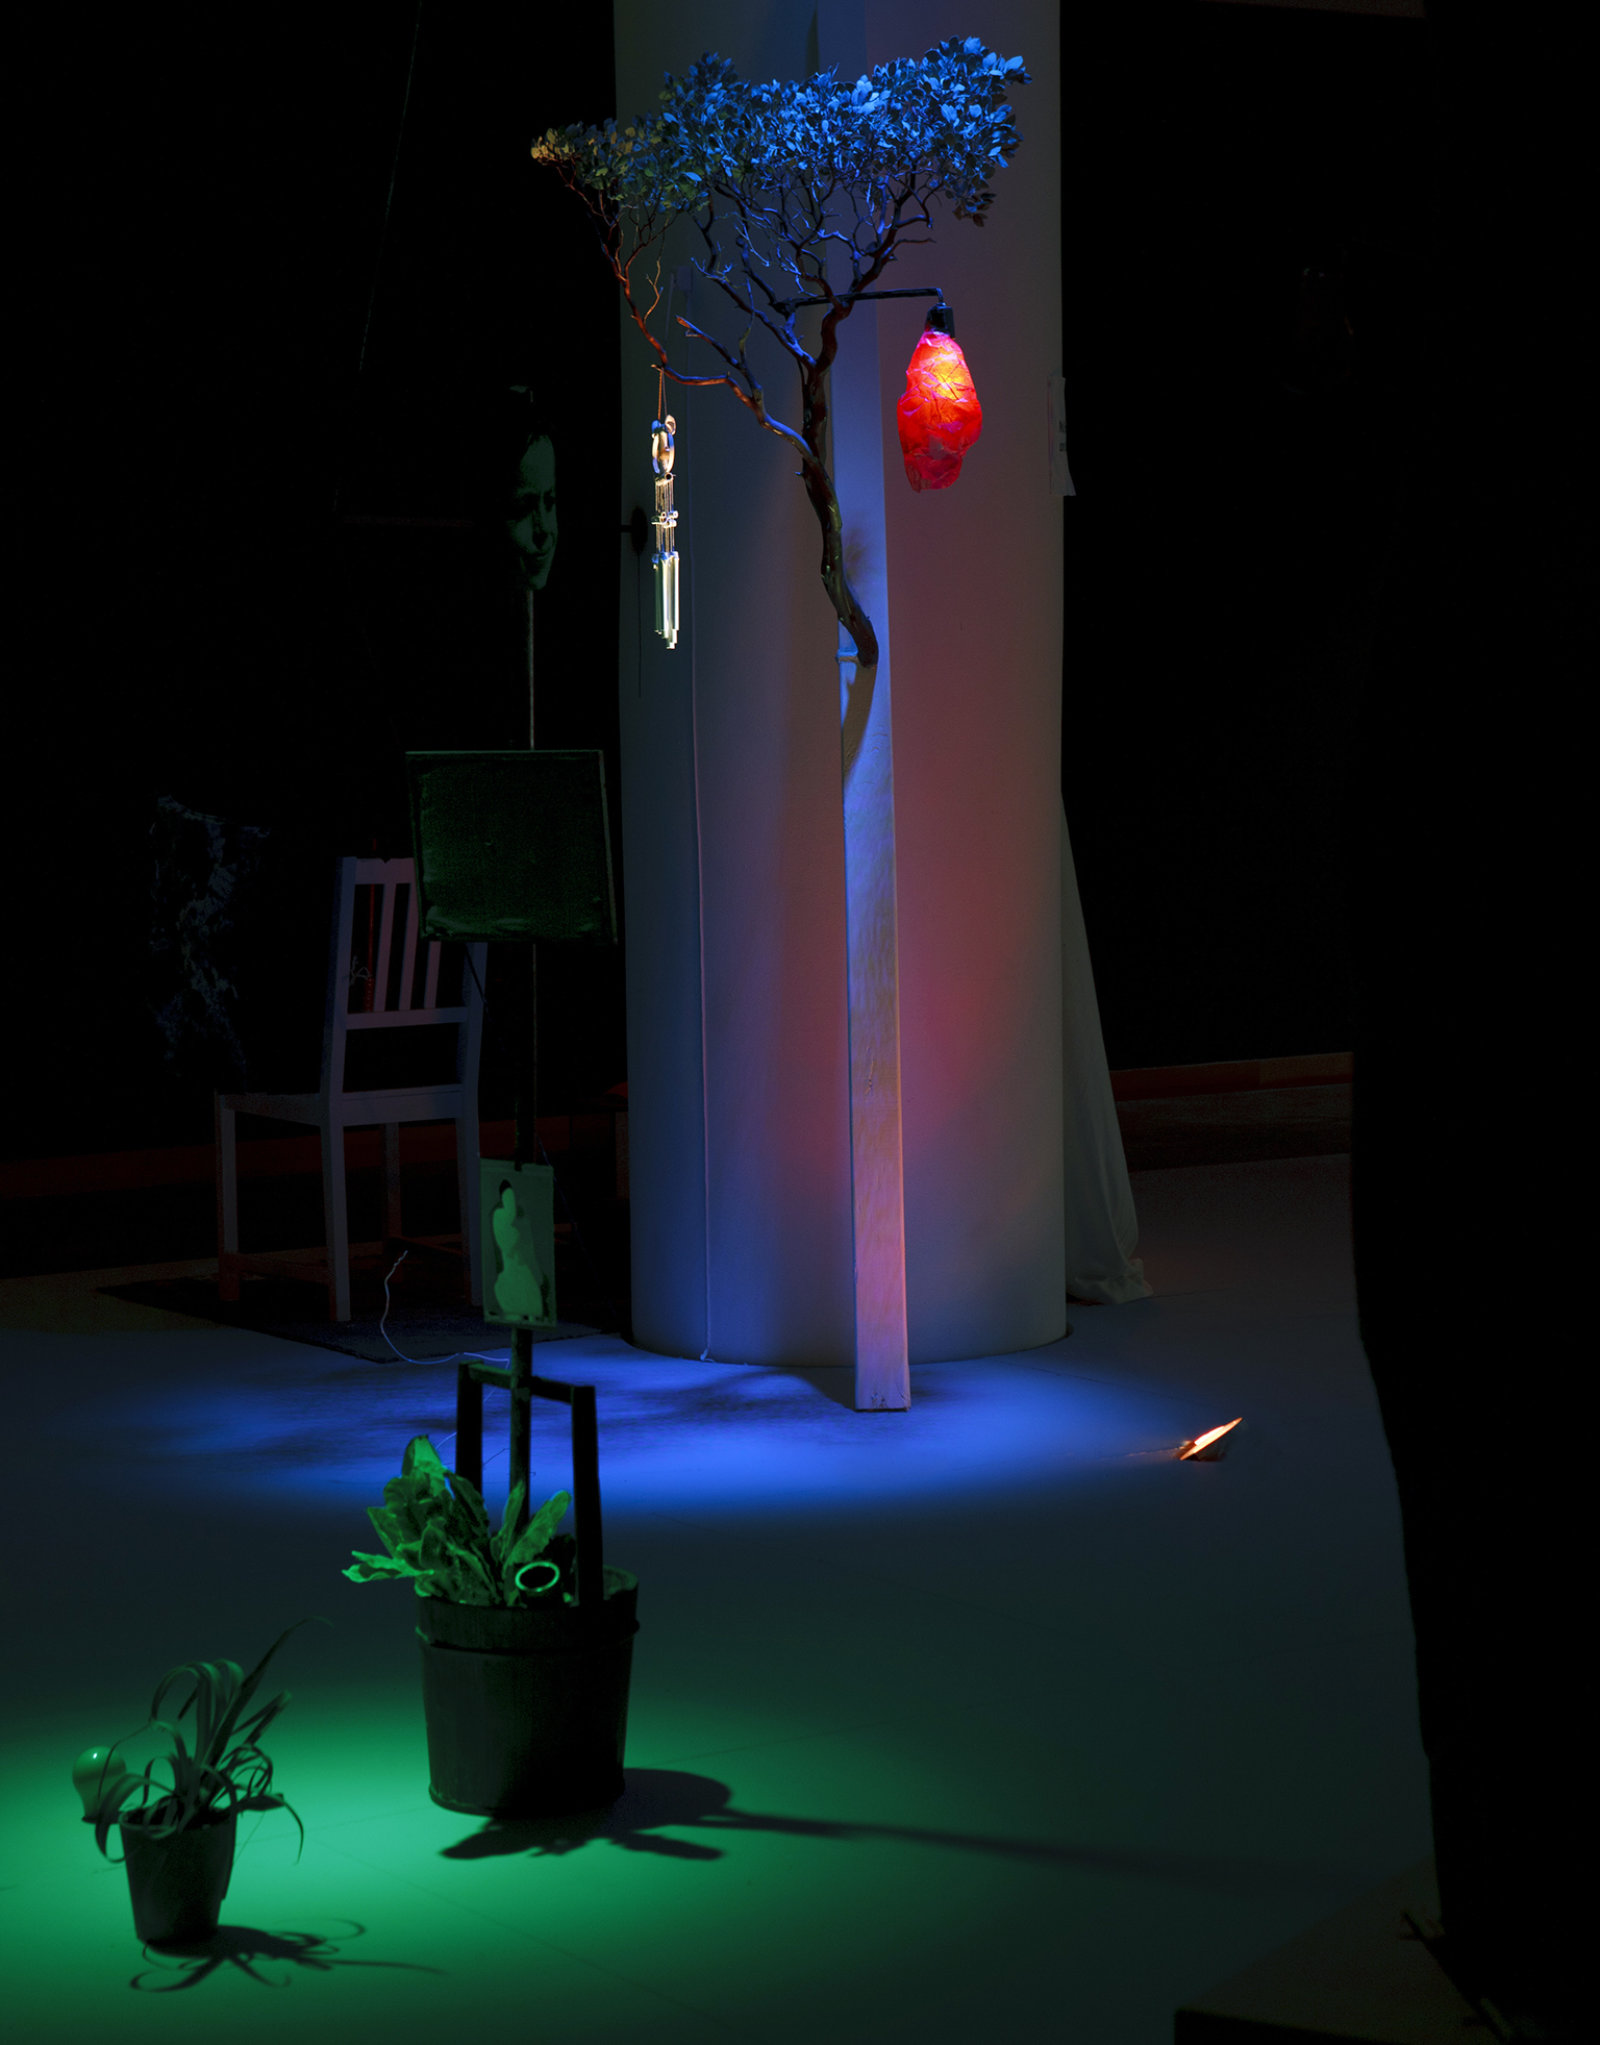 Geoffrey Farmer, Let's Make The Water Turn Black, 2011, a theatrical presentation of sculptural objects on a stage, with animatronics, audio and lighting directed by various computer programs, 289 x 360 x 90 in. (734 x 914 x 229 cm). Installation view, REDCAT, Los Angeles, 2011